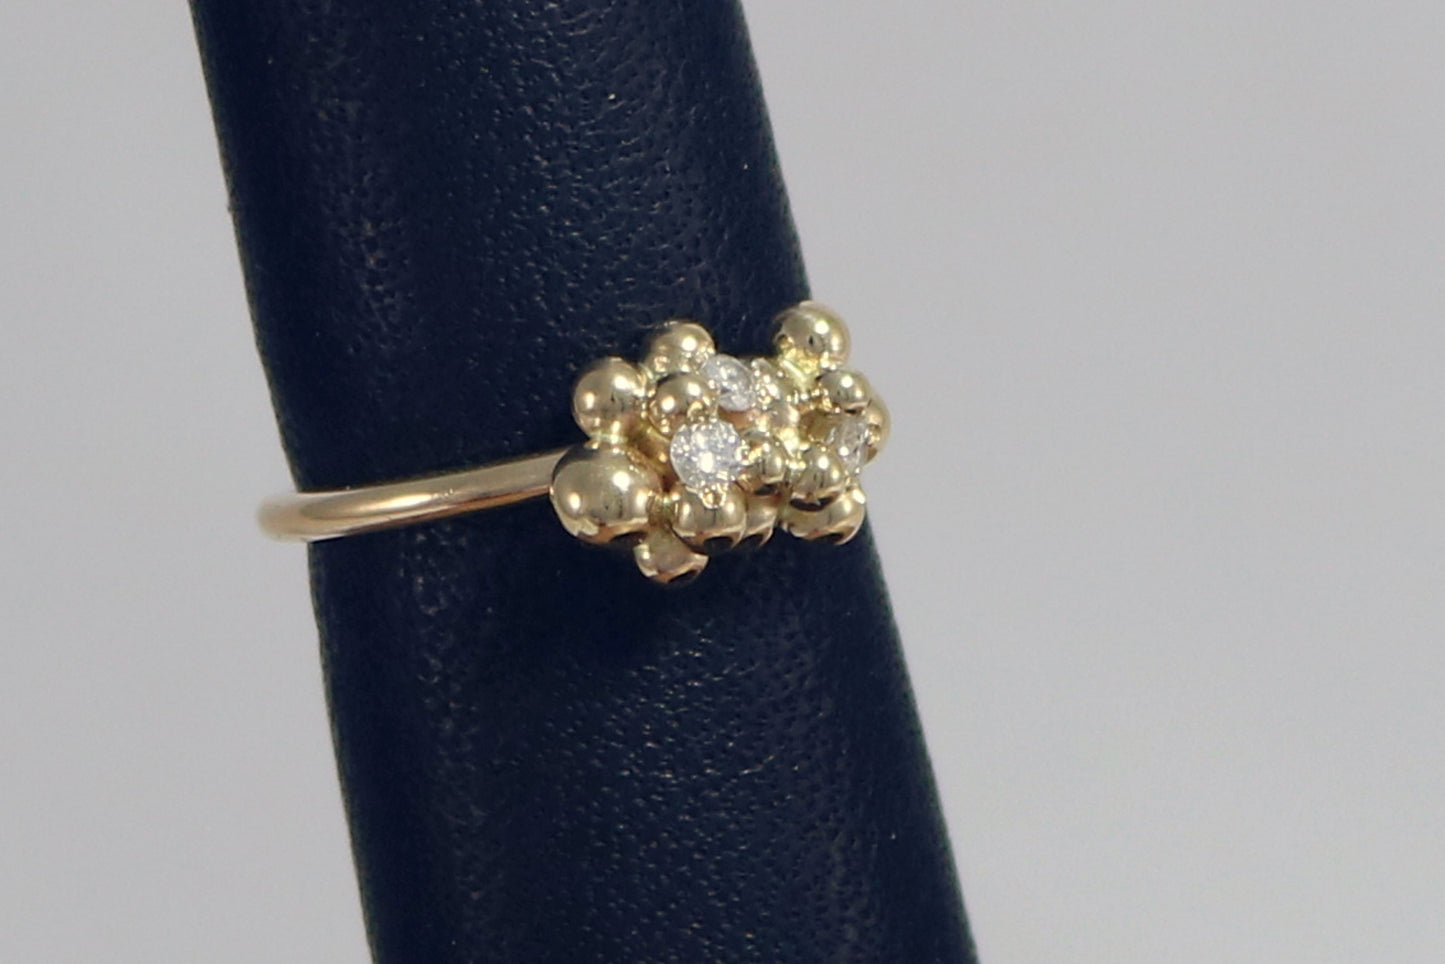 14k yellow gold bubble cluster ring with three 2mm white diamonds.